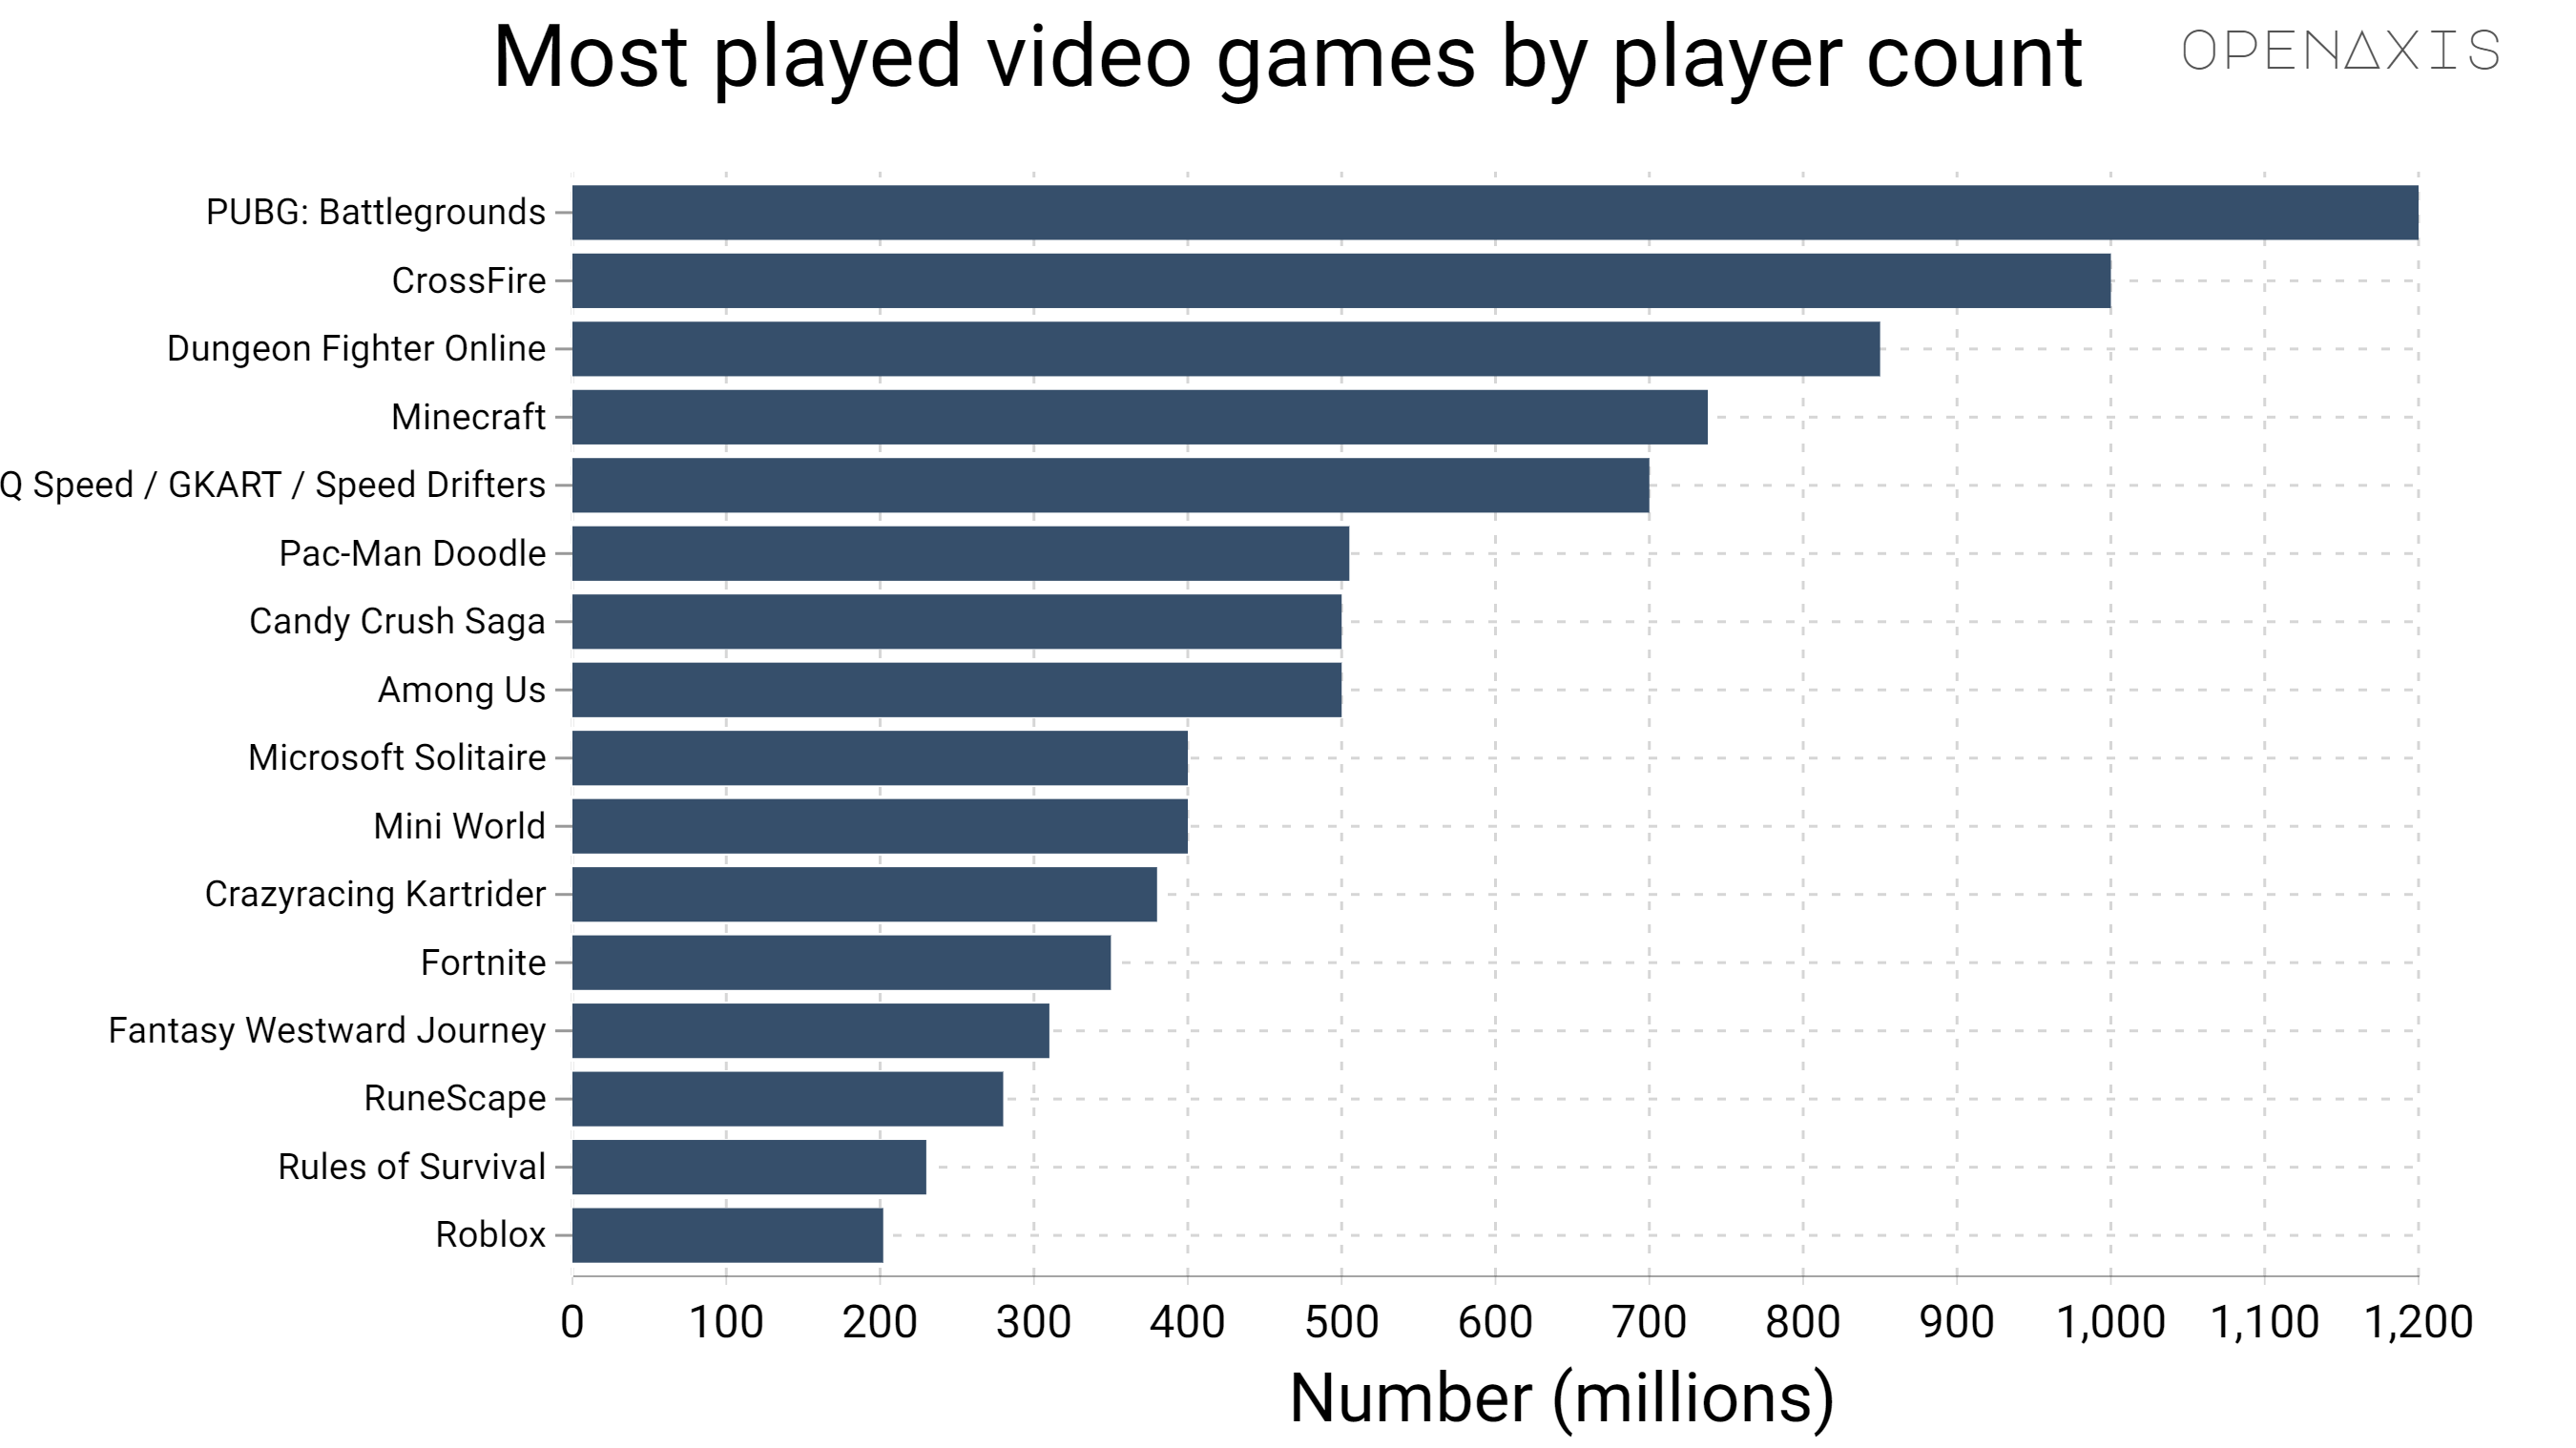 <p>This is a list of the most-played video games ordered by their estimated player count, which include downloads, registered accounts, video game subscription services, and/or monthly active users.</p><p><br /></p><p>This list does not include games with official sales figures. This list is also not comprehensive, because player counts are not always publicly available, reliable, or up-to-date. The list does not include mobile games, unless versions of the game have also been released on non-mobile platforms. </p><p><br /></p><p>Four of the top five most-played video games on this list are published by Tencent.</p><p><br /></p><p><span data-index="0" data-denotation-char data-id="0" data-value="&lt;a href=&quot;/search?q=%23entertainment&quot; target=_self&gt;#entertainment" data-link="/search?q=%23entertainment">﻿<span contenteditable="false"><span></span><a href="/search?q=%23entertainment" target="_self">#entertainment</a></span>﻿</span> <span data-index="0" data-denotation-char data-id="0" data-value="&lt;a href=&quot;/search?q=%23gaming&quot; target=_self&gt;#gaming" data-link="/search?q=%23gaming">﻿<span contenteditable="false"><span></span><a href="/search?q=%23gaming" target="_self">#gaming</a></span>﻿</span></p><p><br /></p><p>Source: <a href="/data/3995" target="_blank">Game sources, Wikipedia</a></p><p><br /></p>